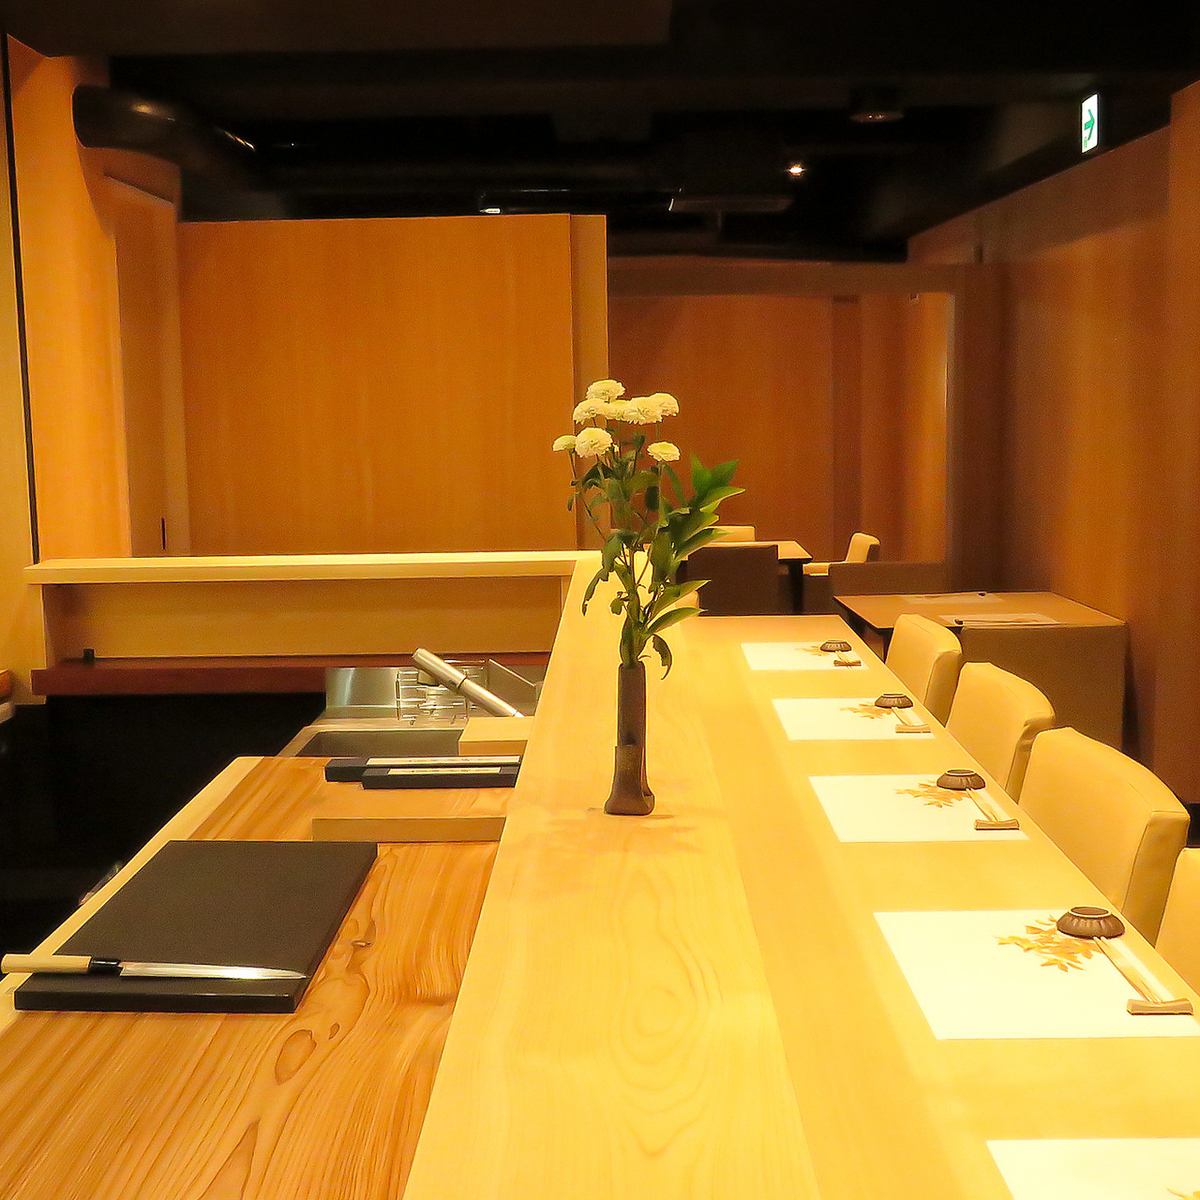 We also have private rooms that can be used for entertaining parties and dinner parties.